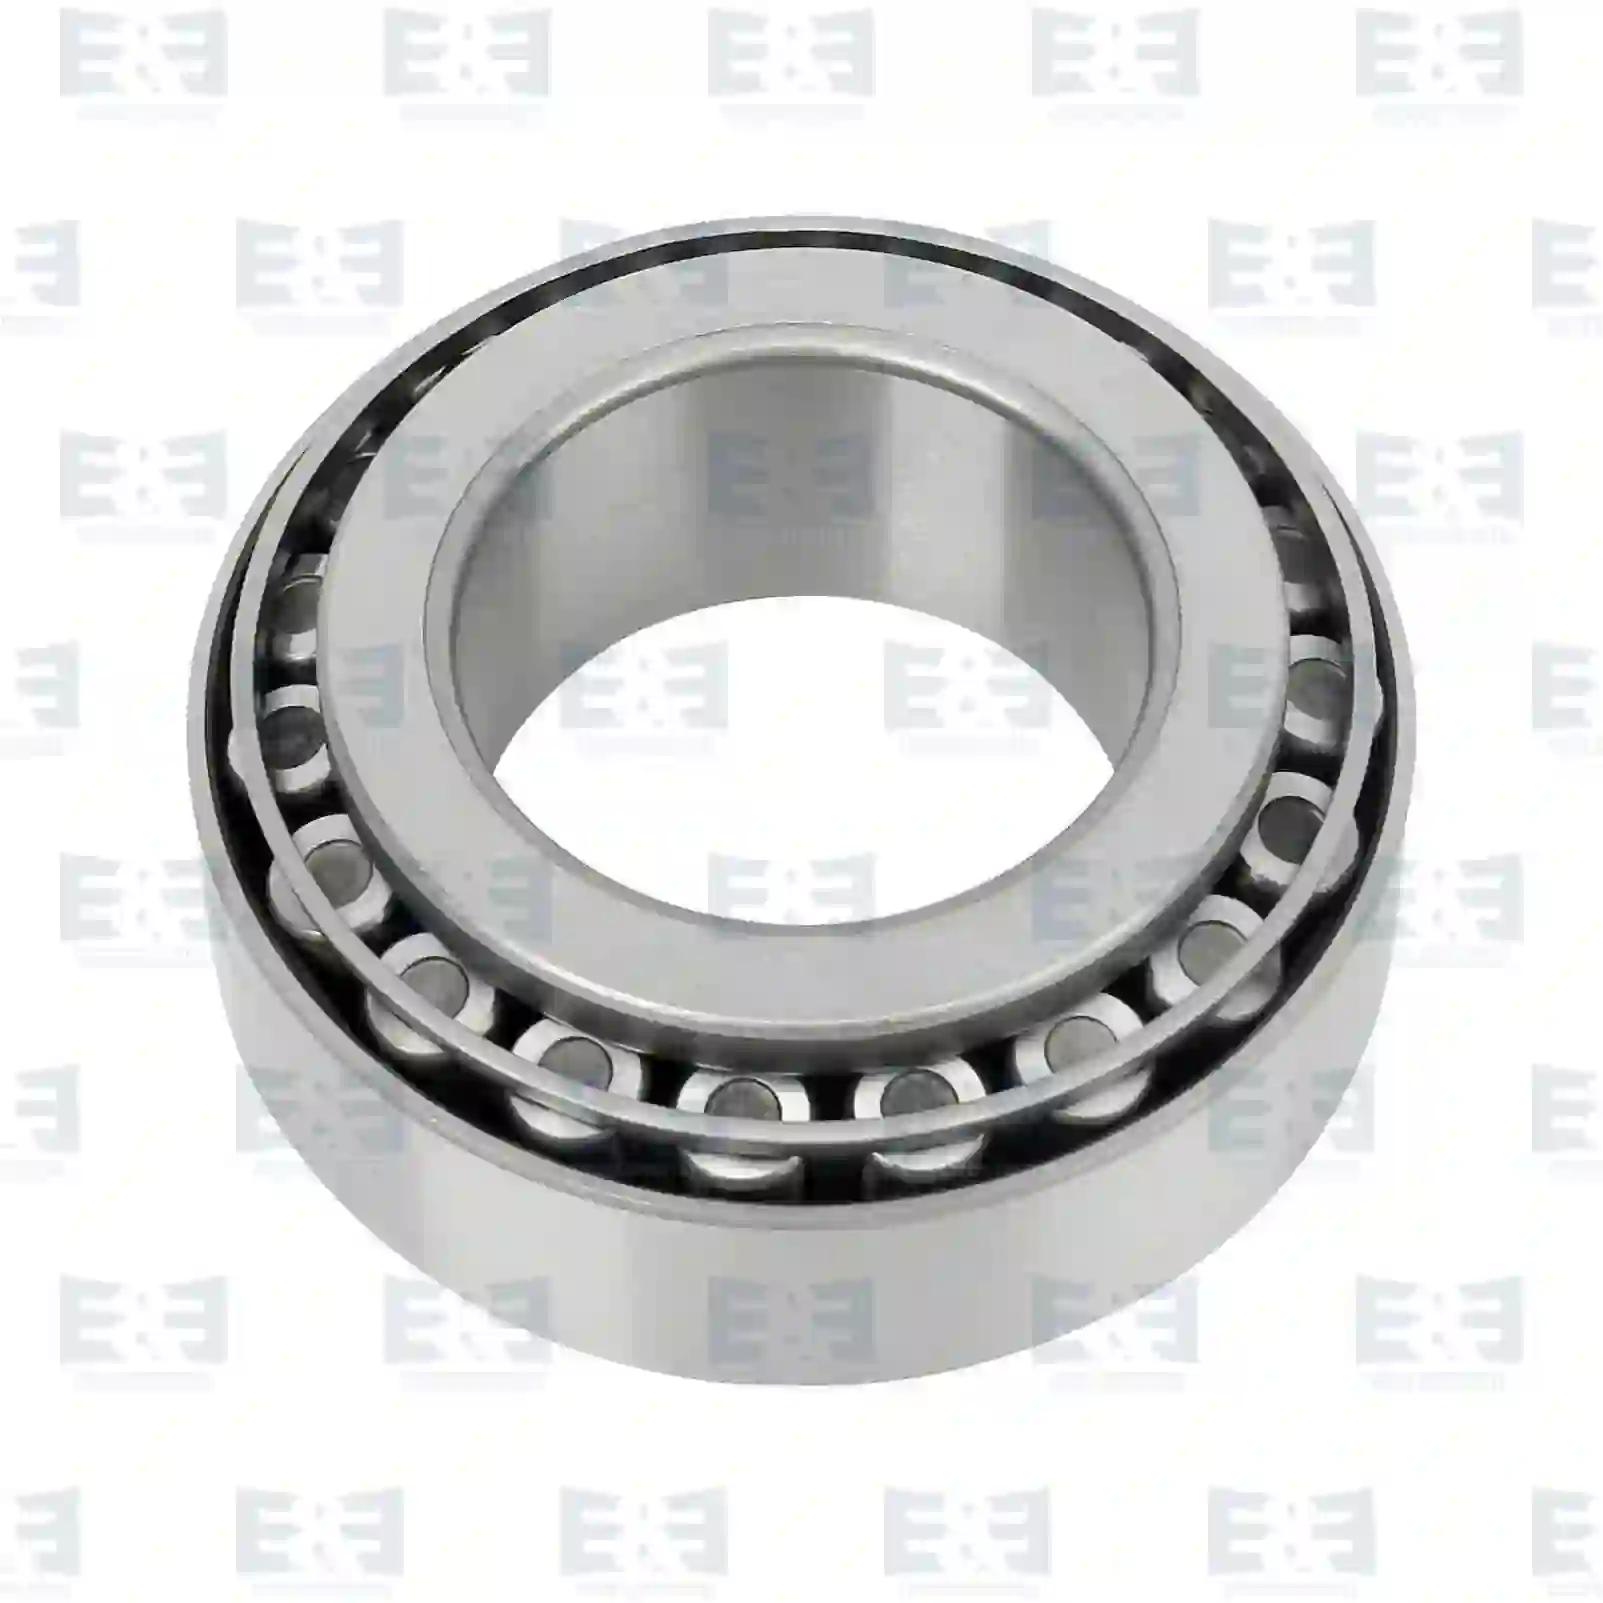  Tapered roller bearing || E&E Truck Spare Parts | Truck Spare Parts, Auotomotive Spare Parts